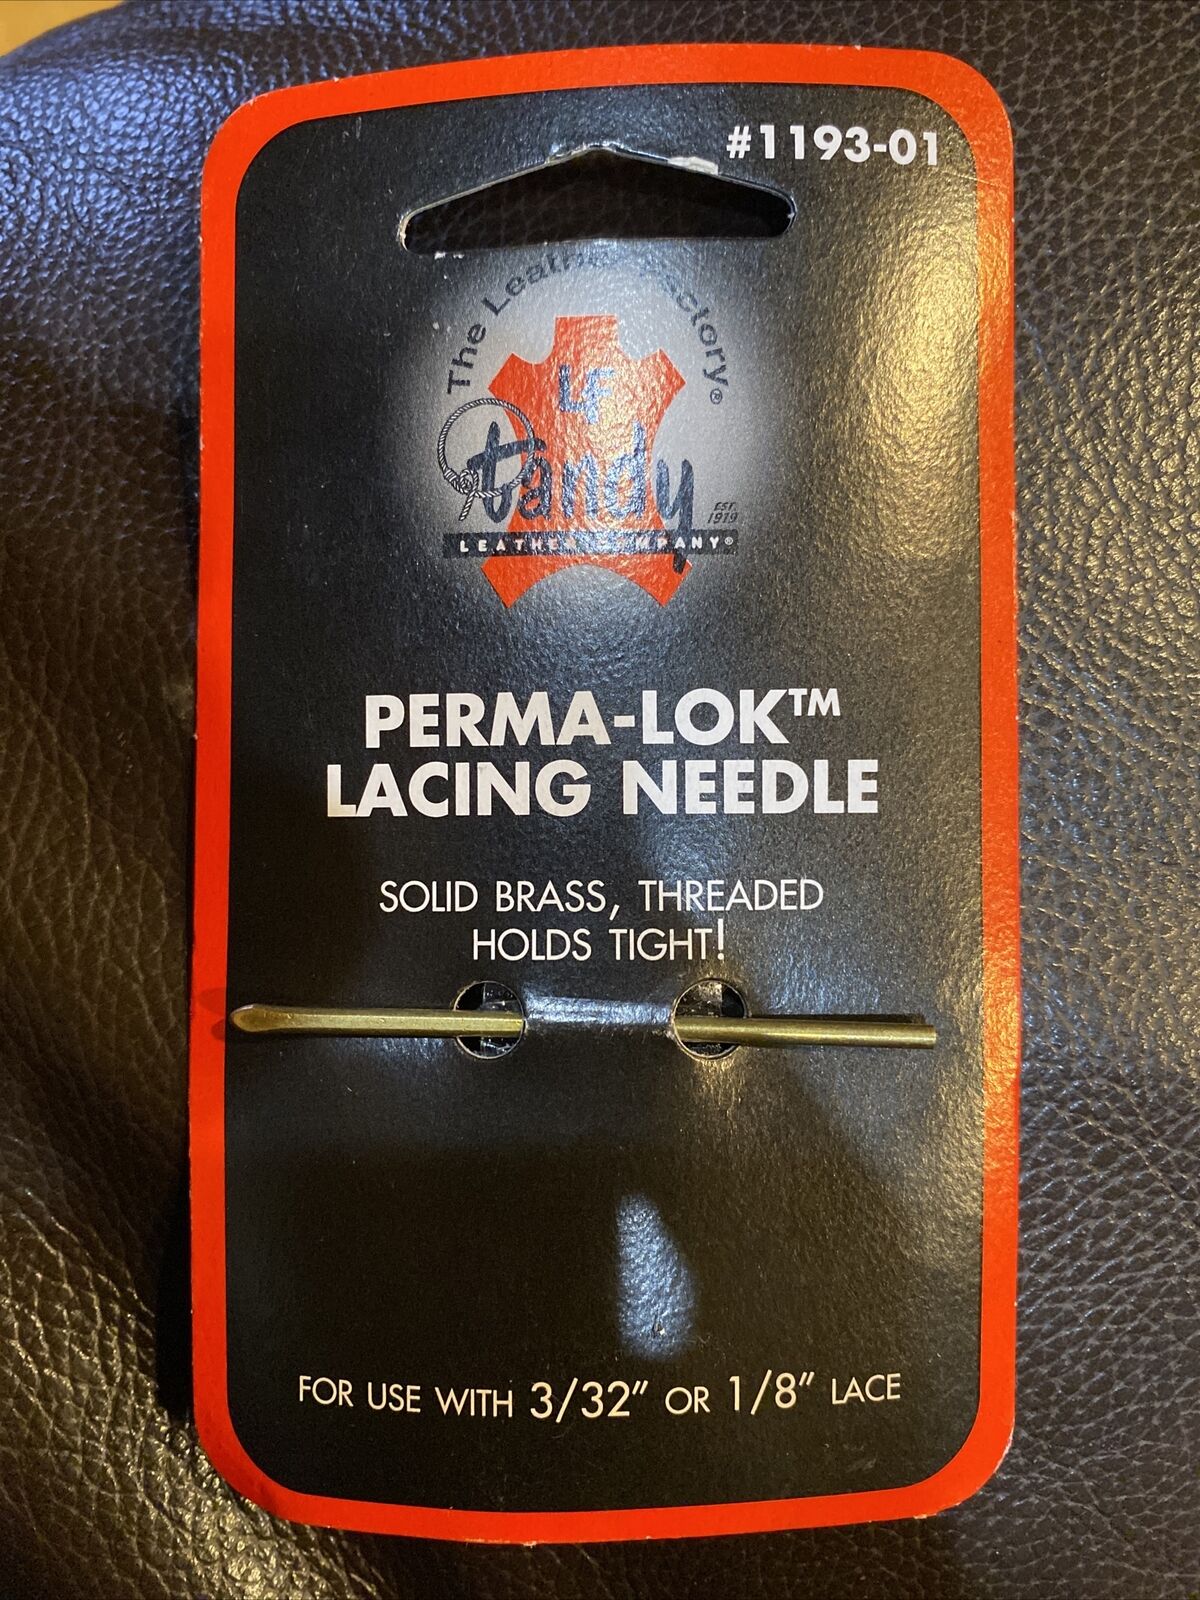 Perma-lok Lacing Needle 1193-01 By Tandy Leather